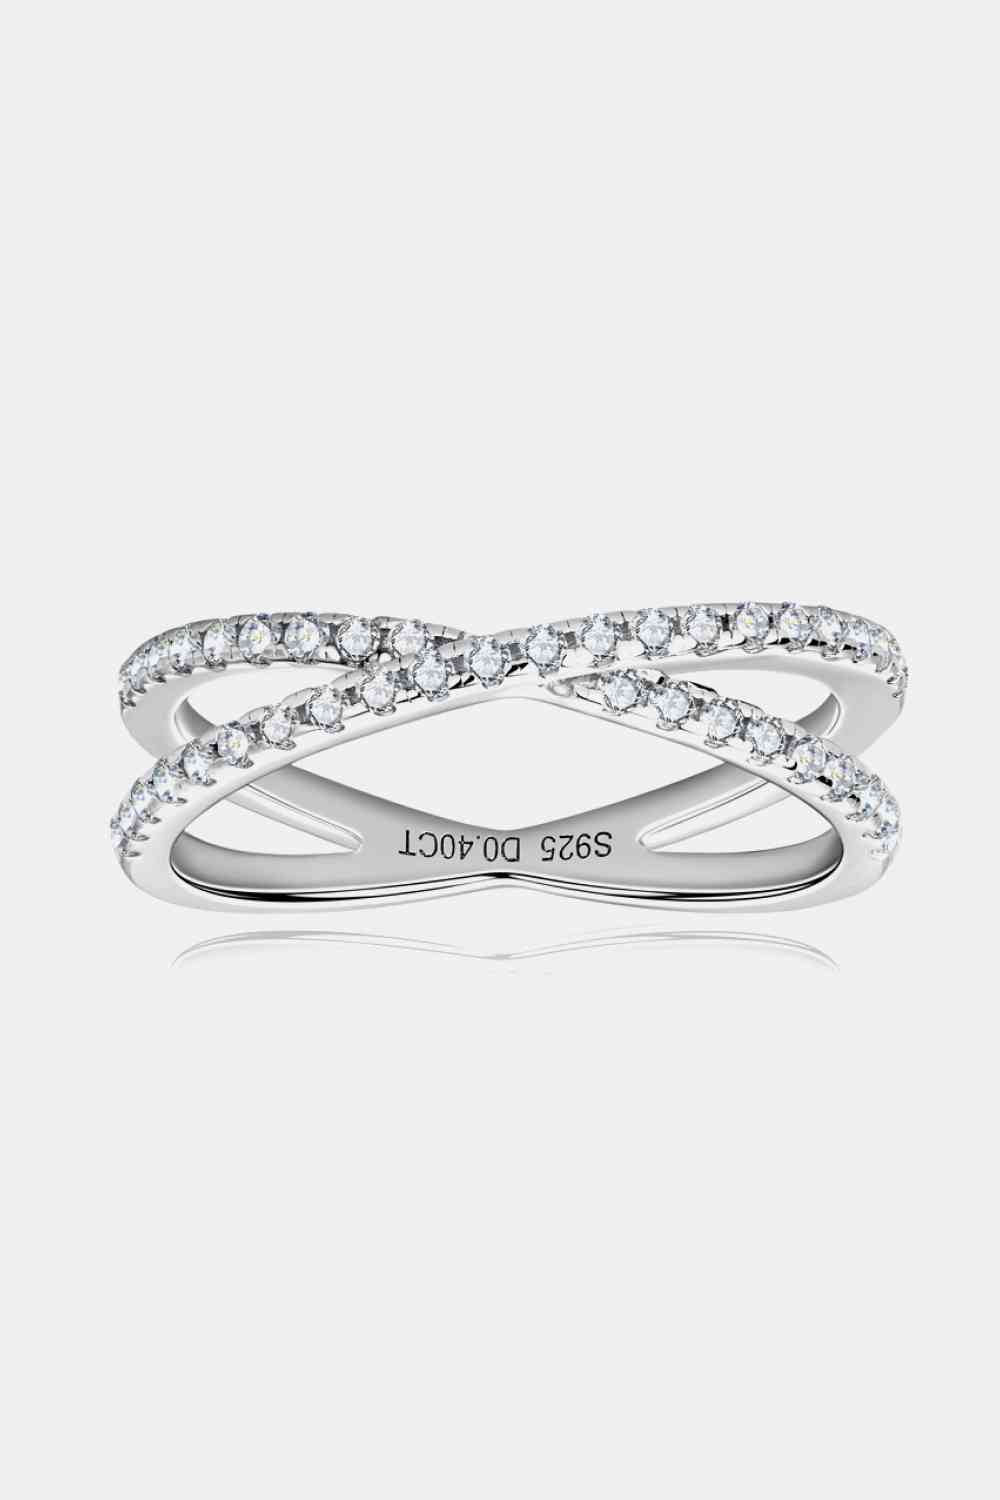 Moissanite 925 Sterling Silver Crisscross Ring - Shop Tophatter Deals, Electronics, Fashion, Jewelry, Health, Beauty, Home Decor, Free Shipping